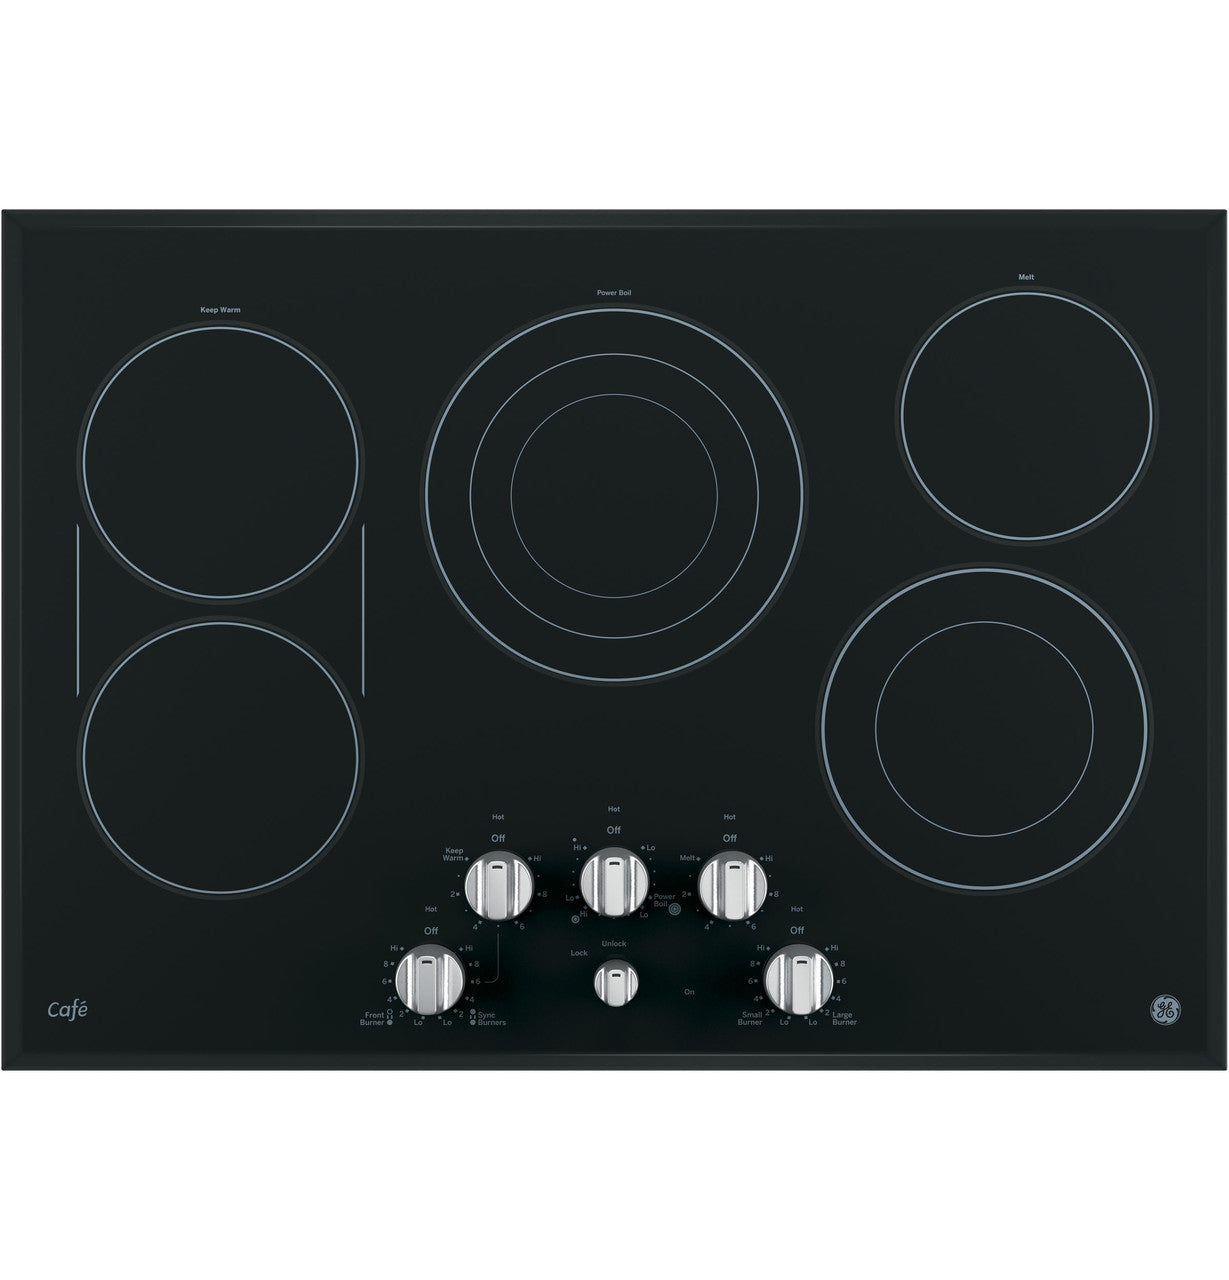 GE Cafe Series 30" Built-In Knob Control Electric Cooktop